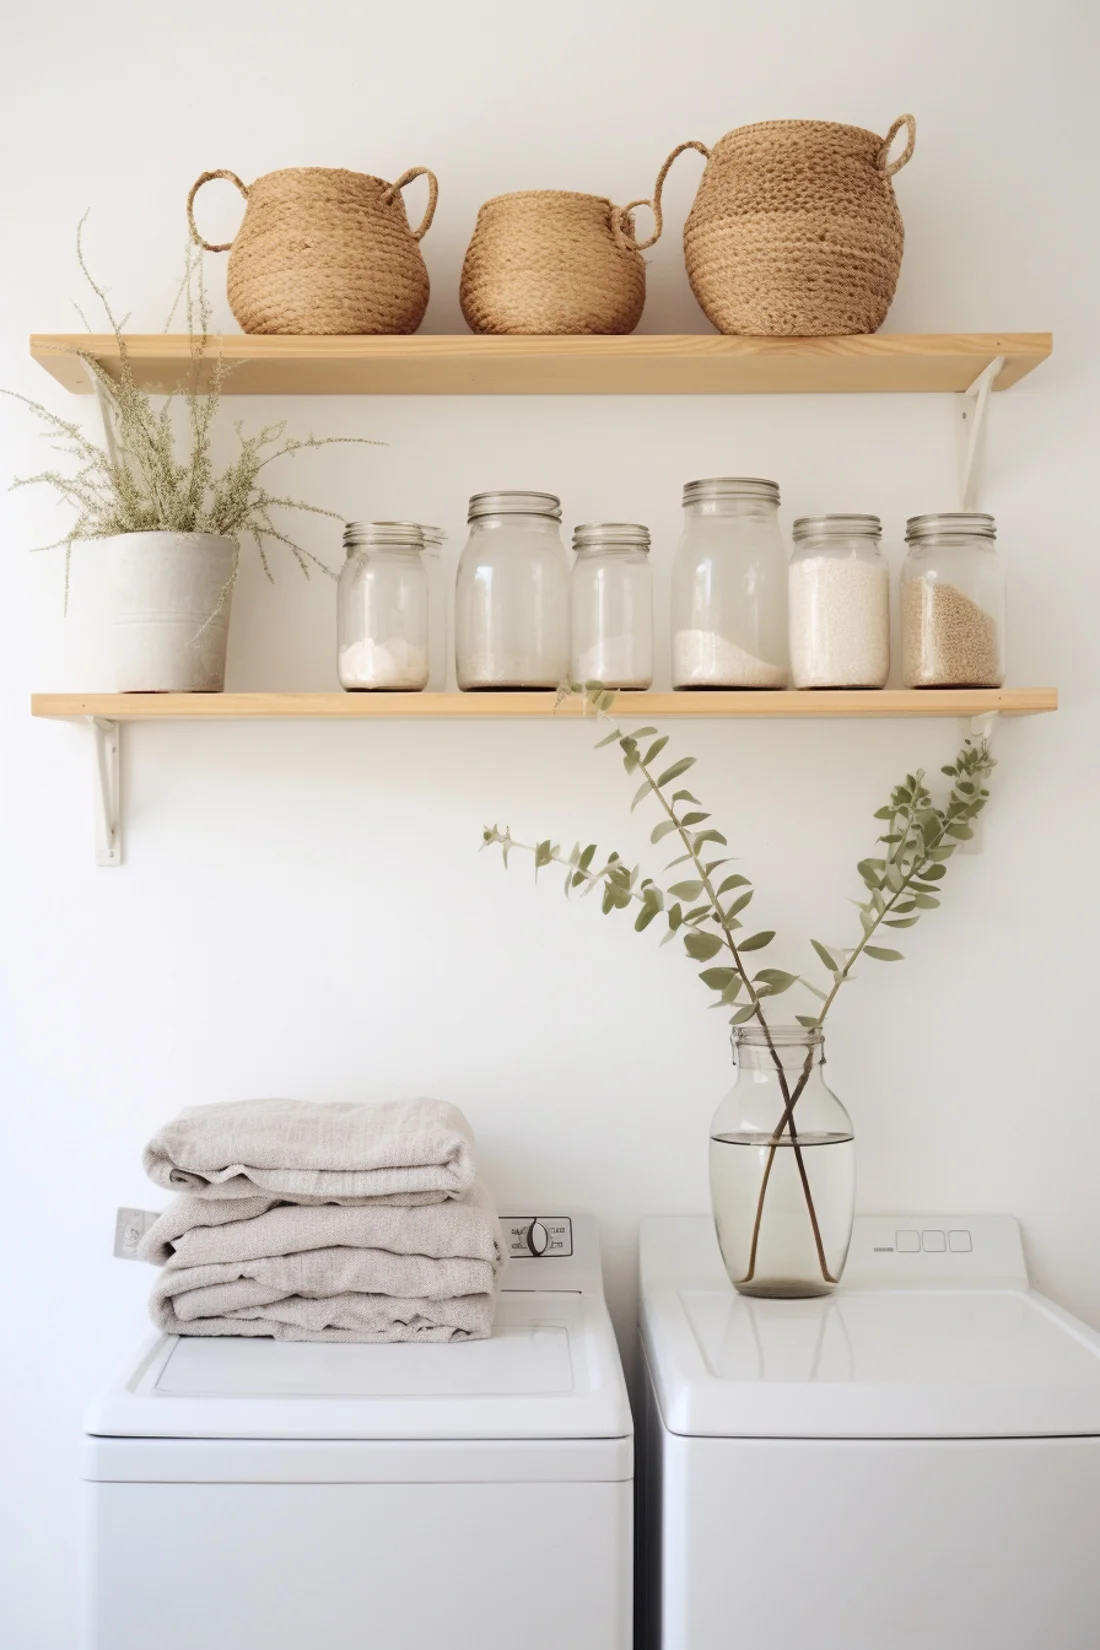 two over the washer shelf ideas, wood with metal brackets, baskets and mason jars holding detergent and laundry supplies